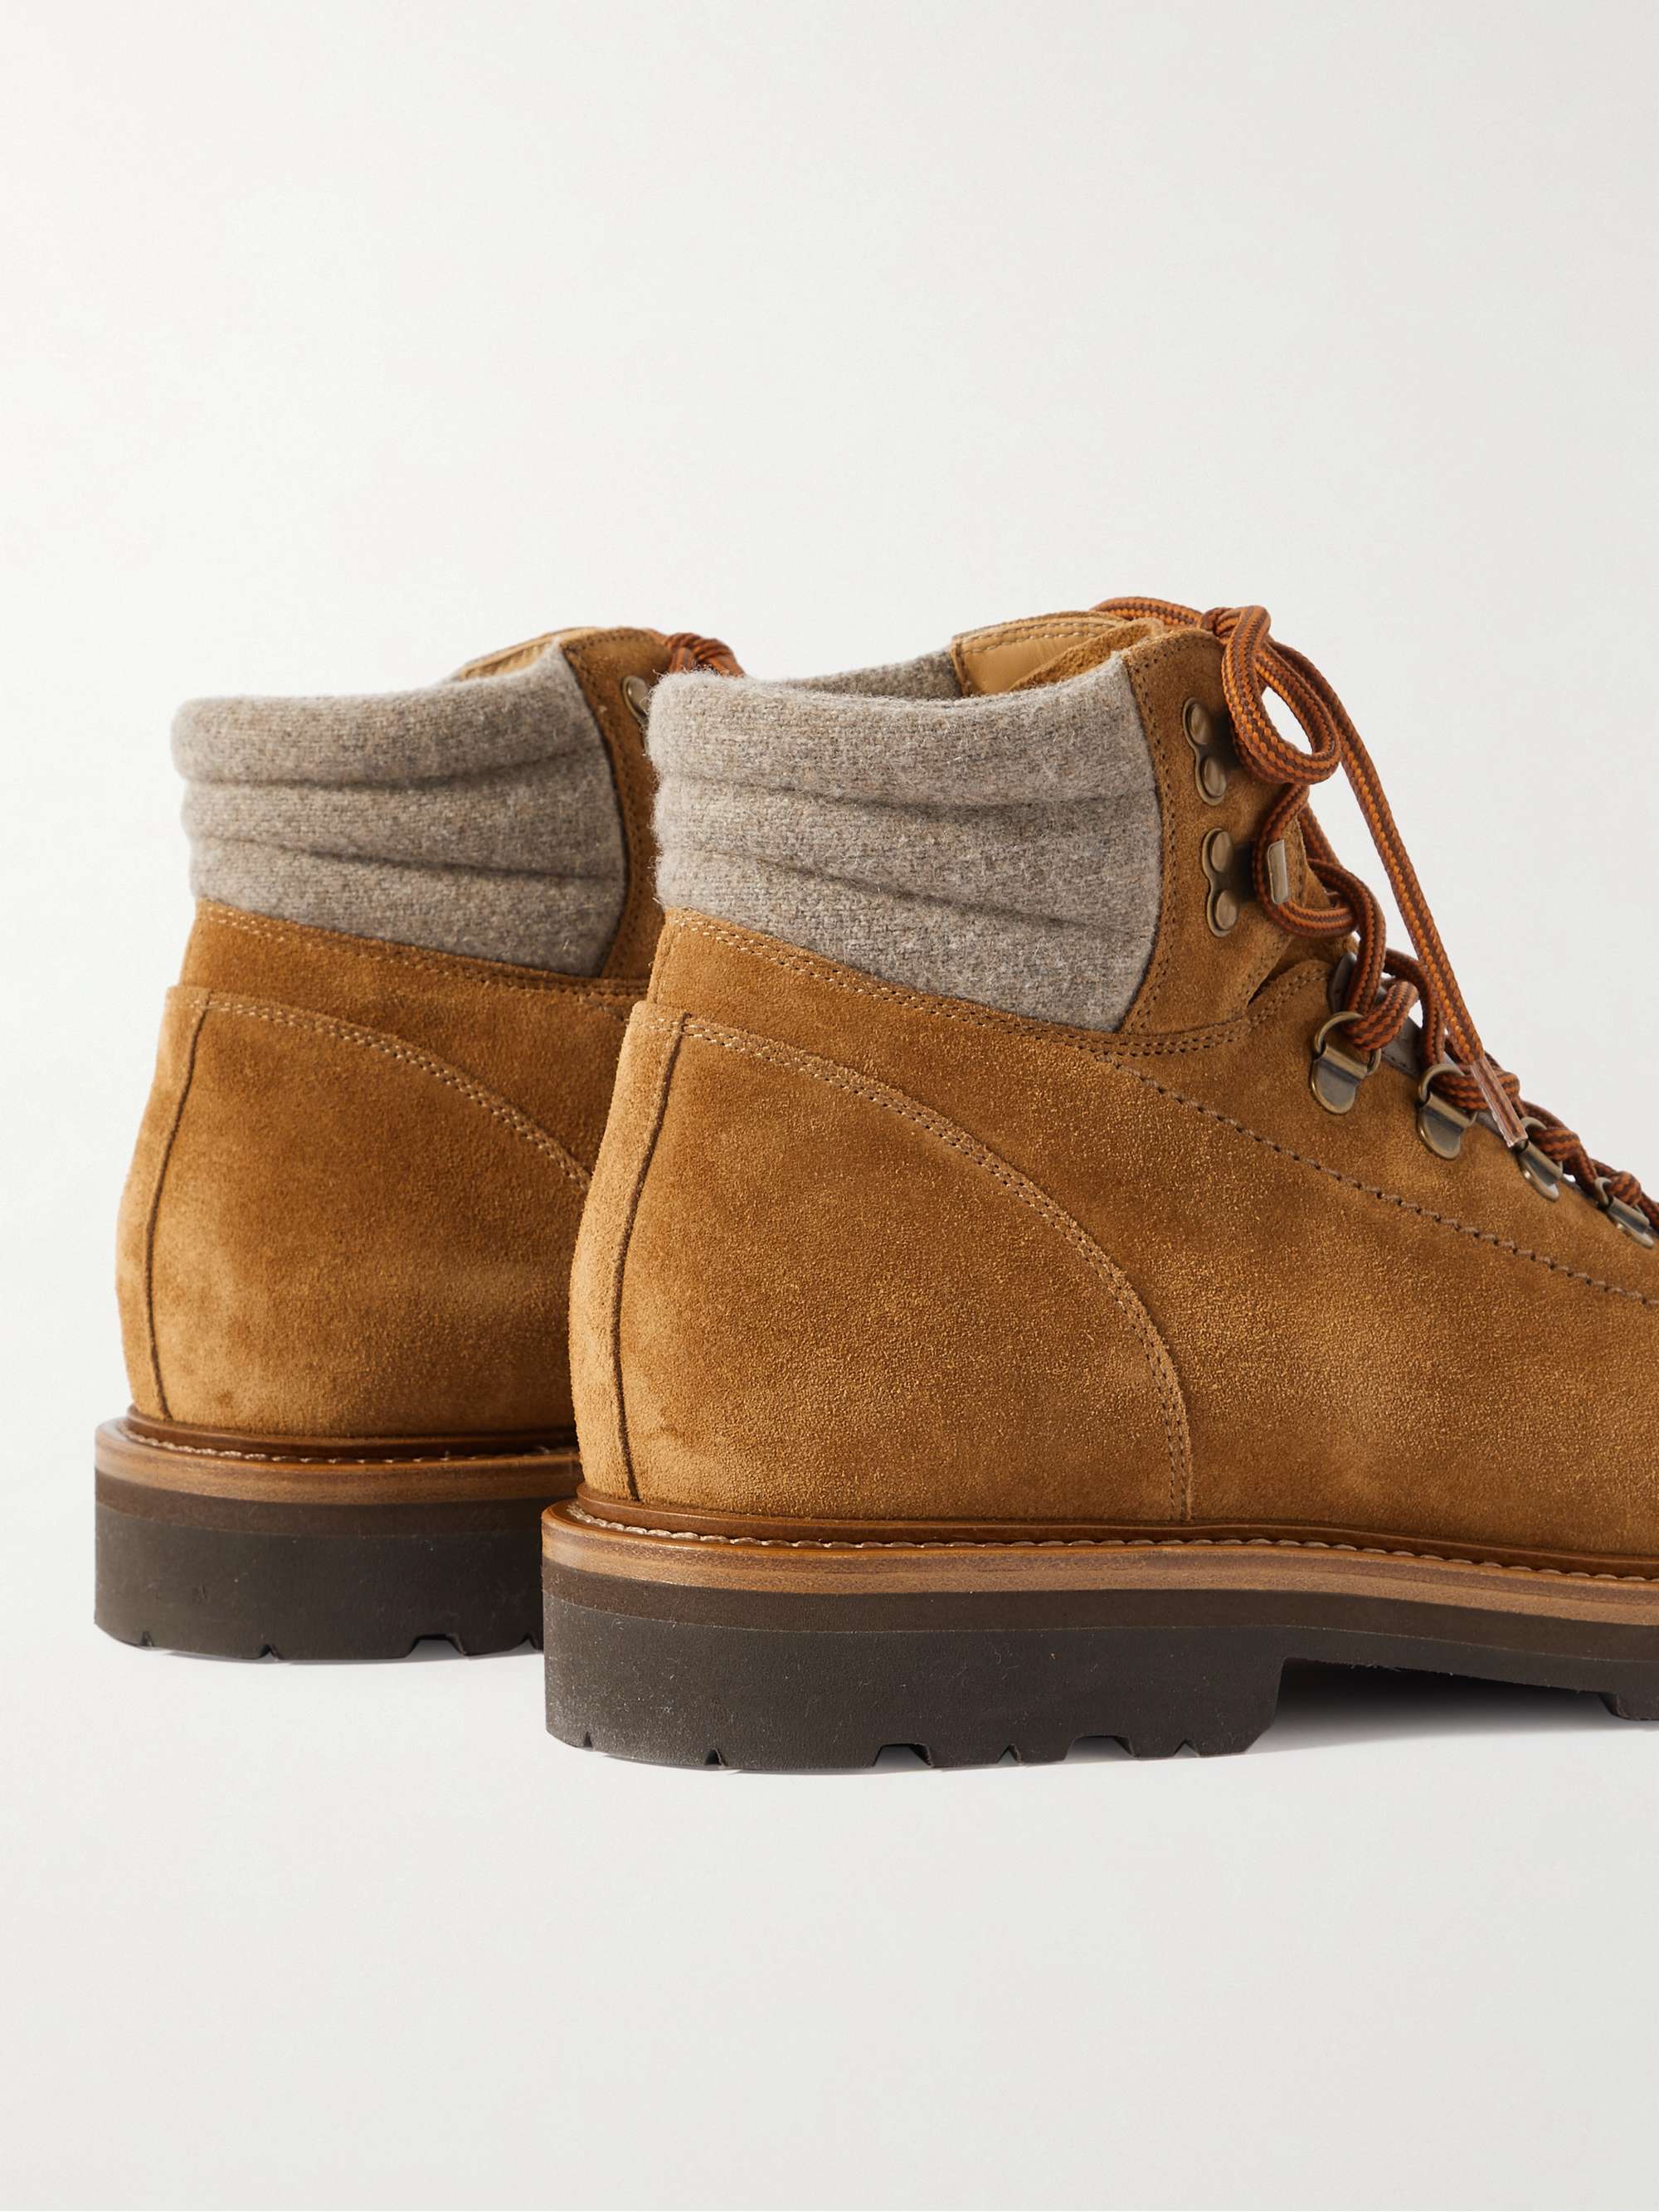 BRUNELLO CUCINELLI Wool-Trimmed Suede Hiking Boots